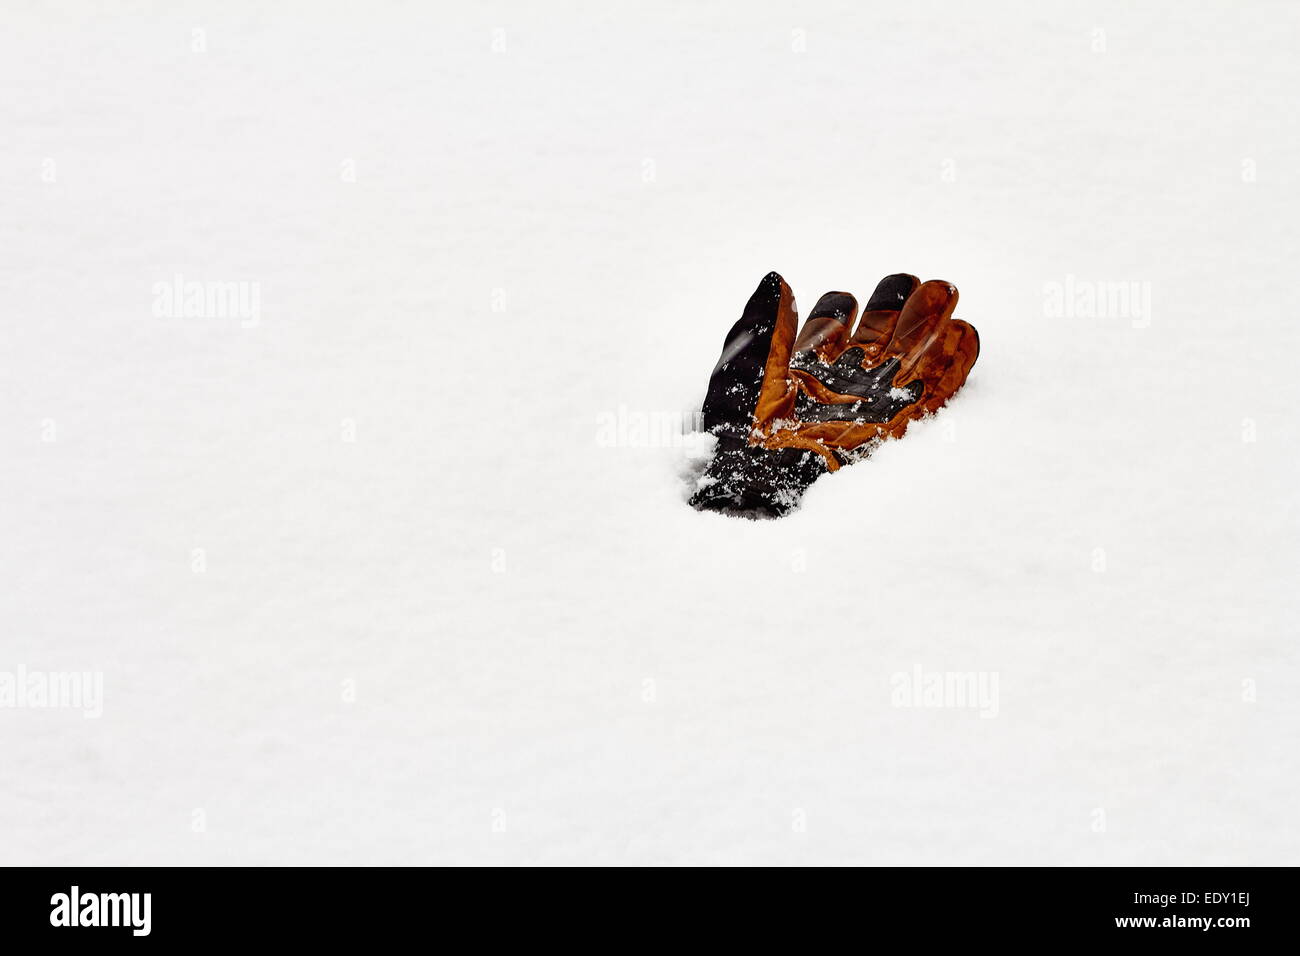 Leather glove laying in snow Stock Photo